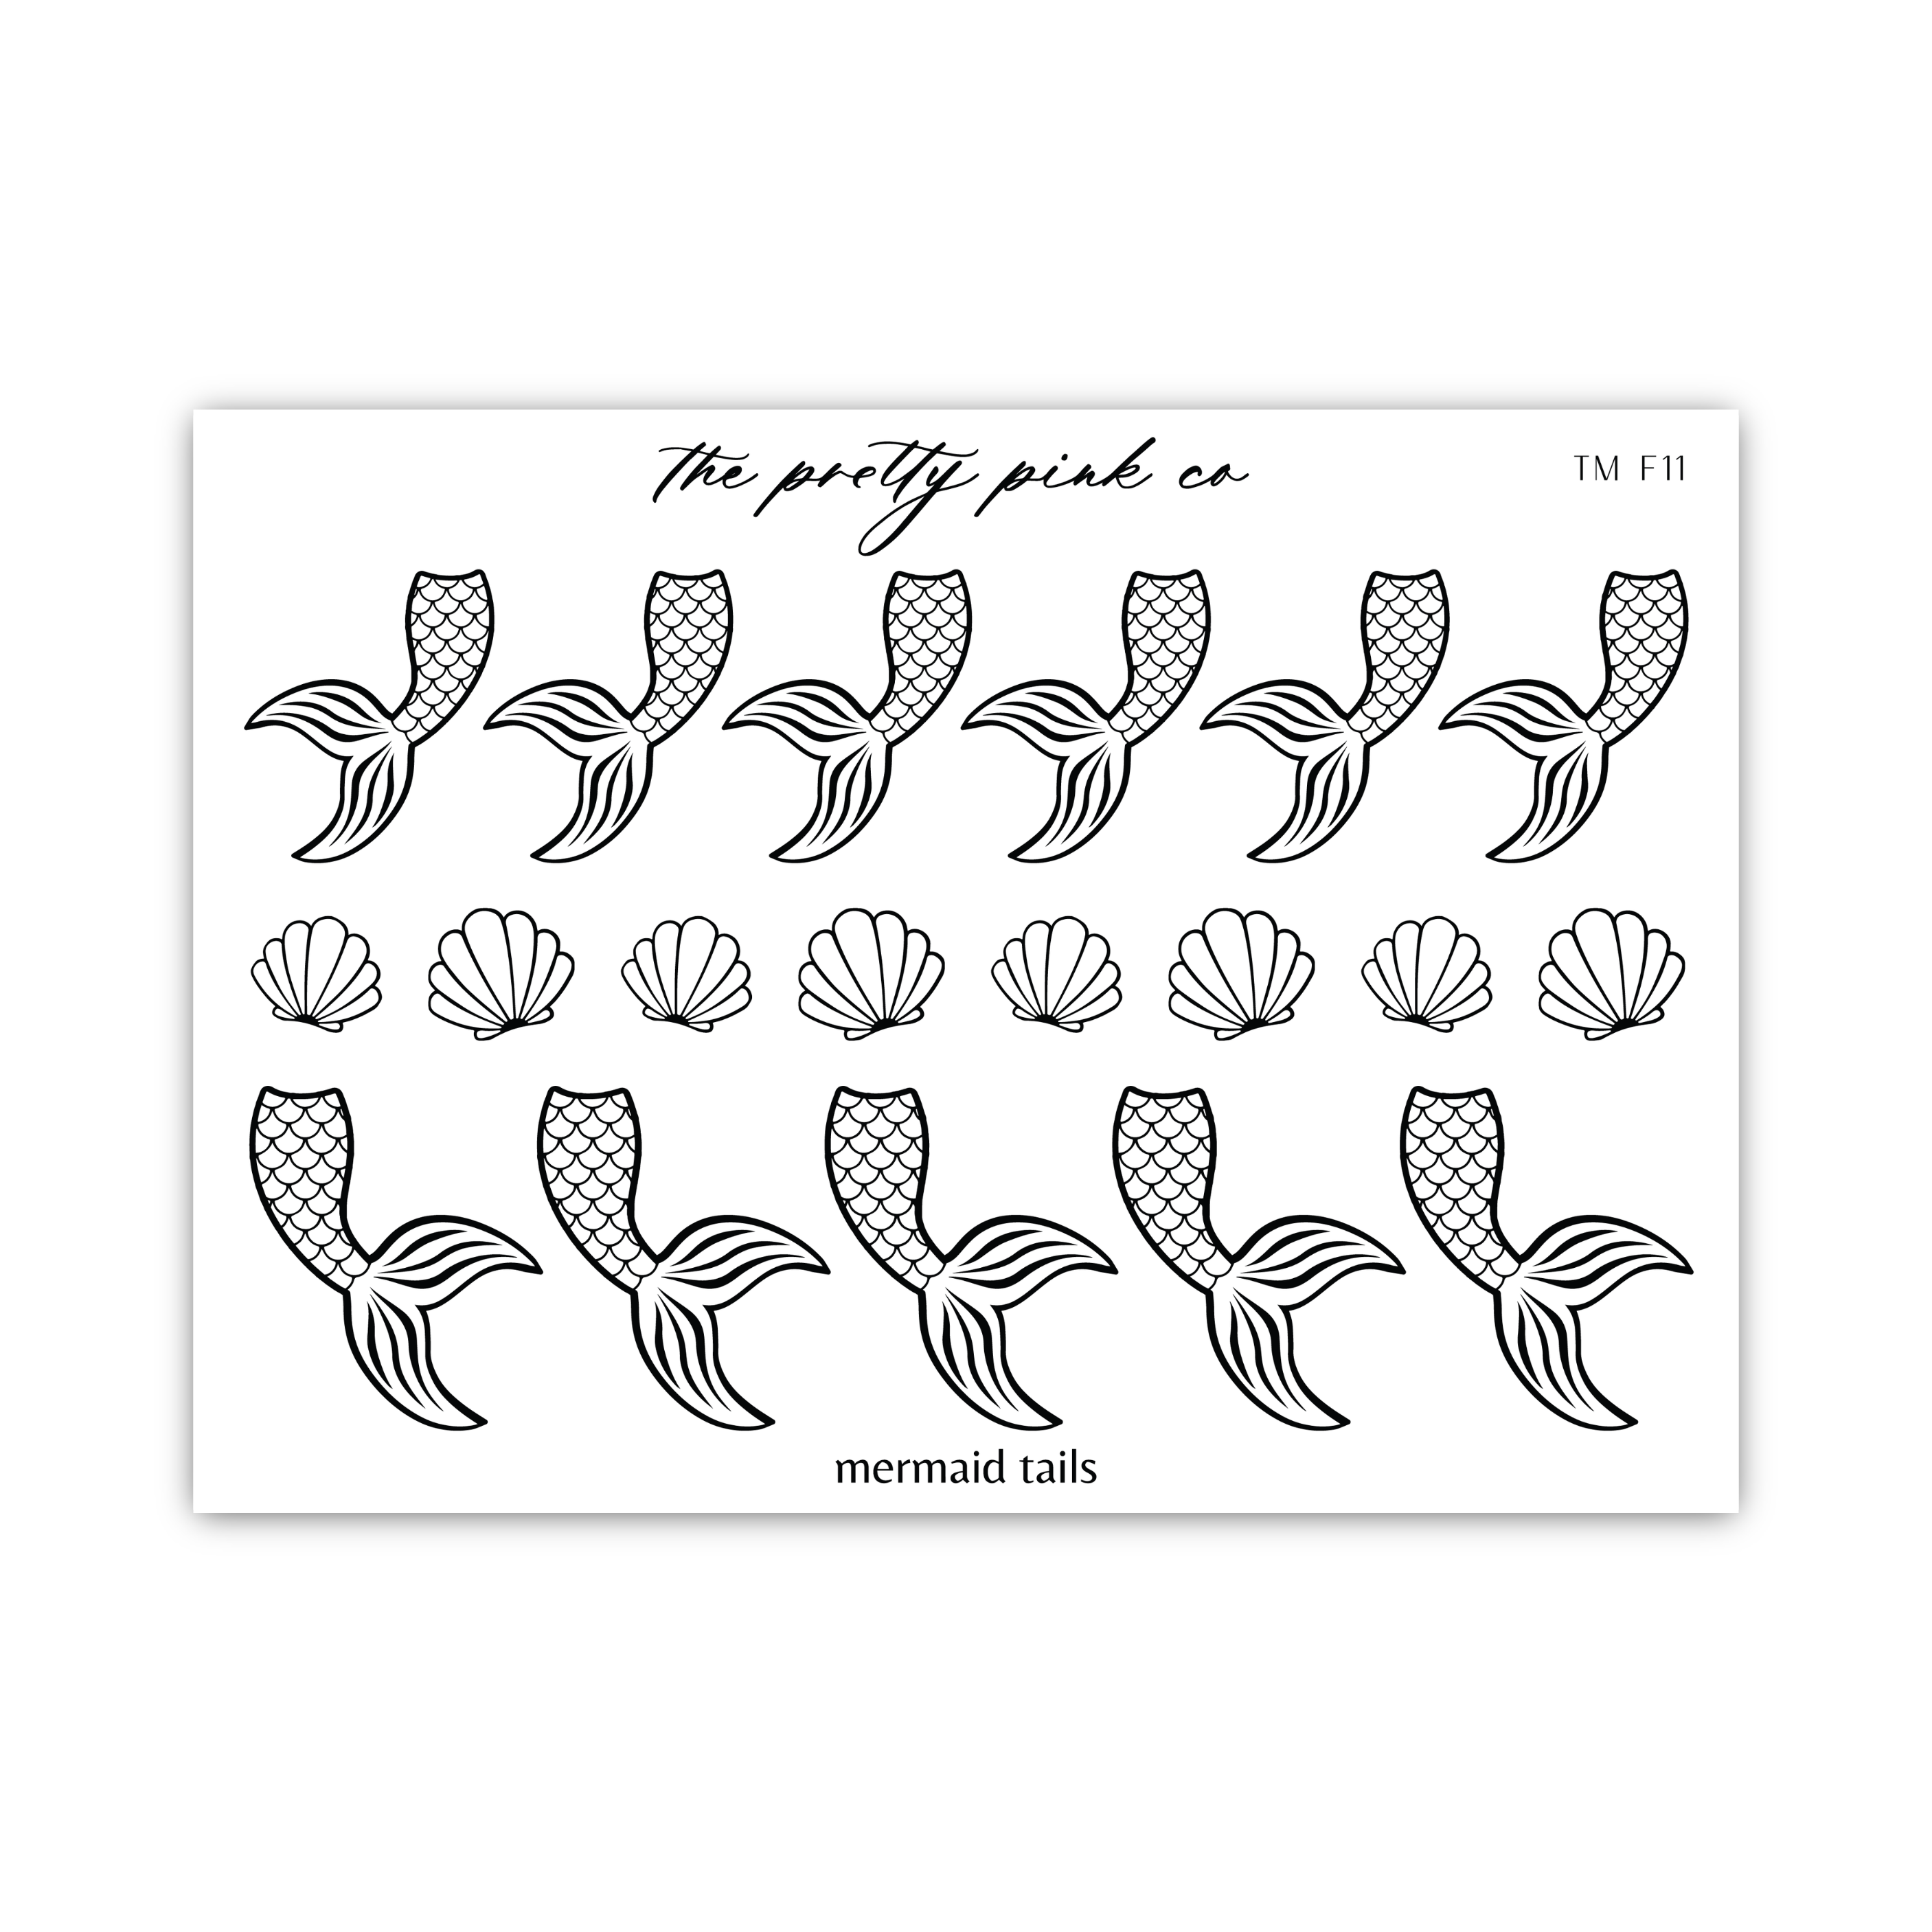 a sheet of mermaid tails on a white background